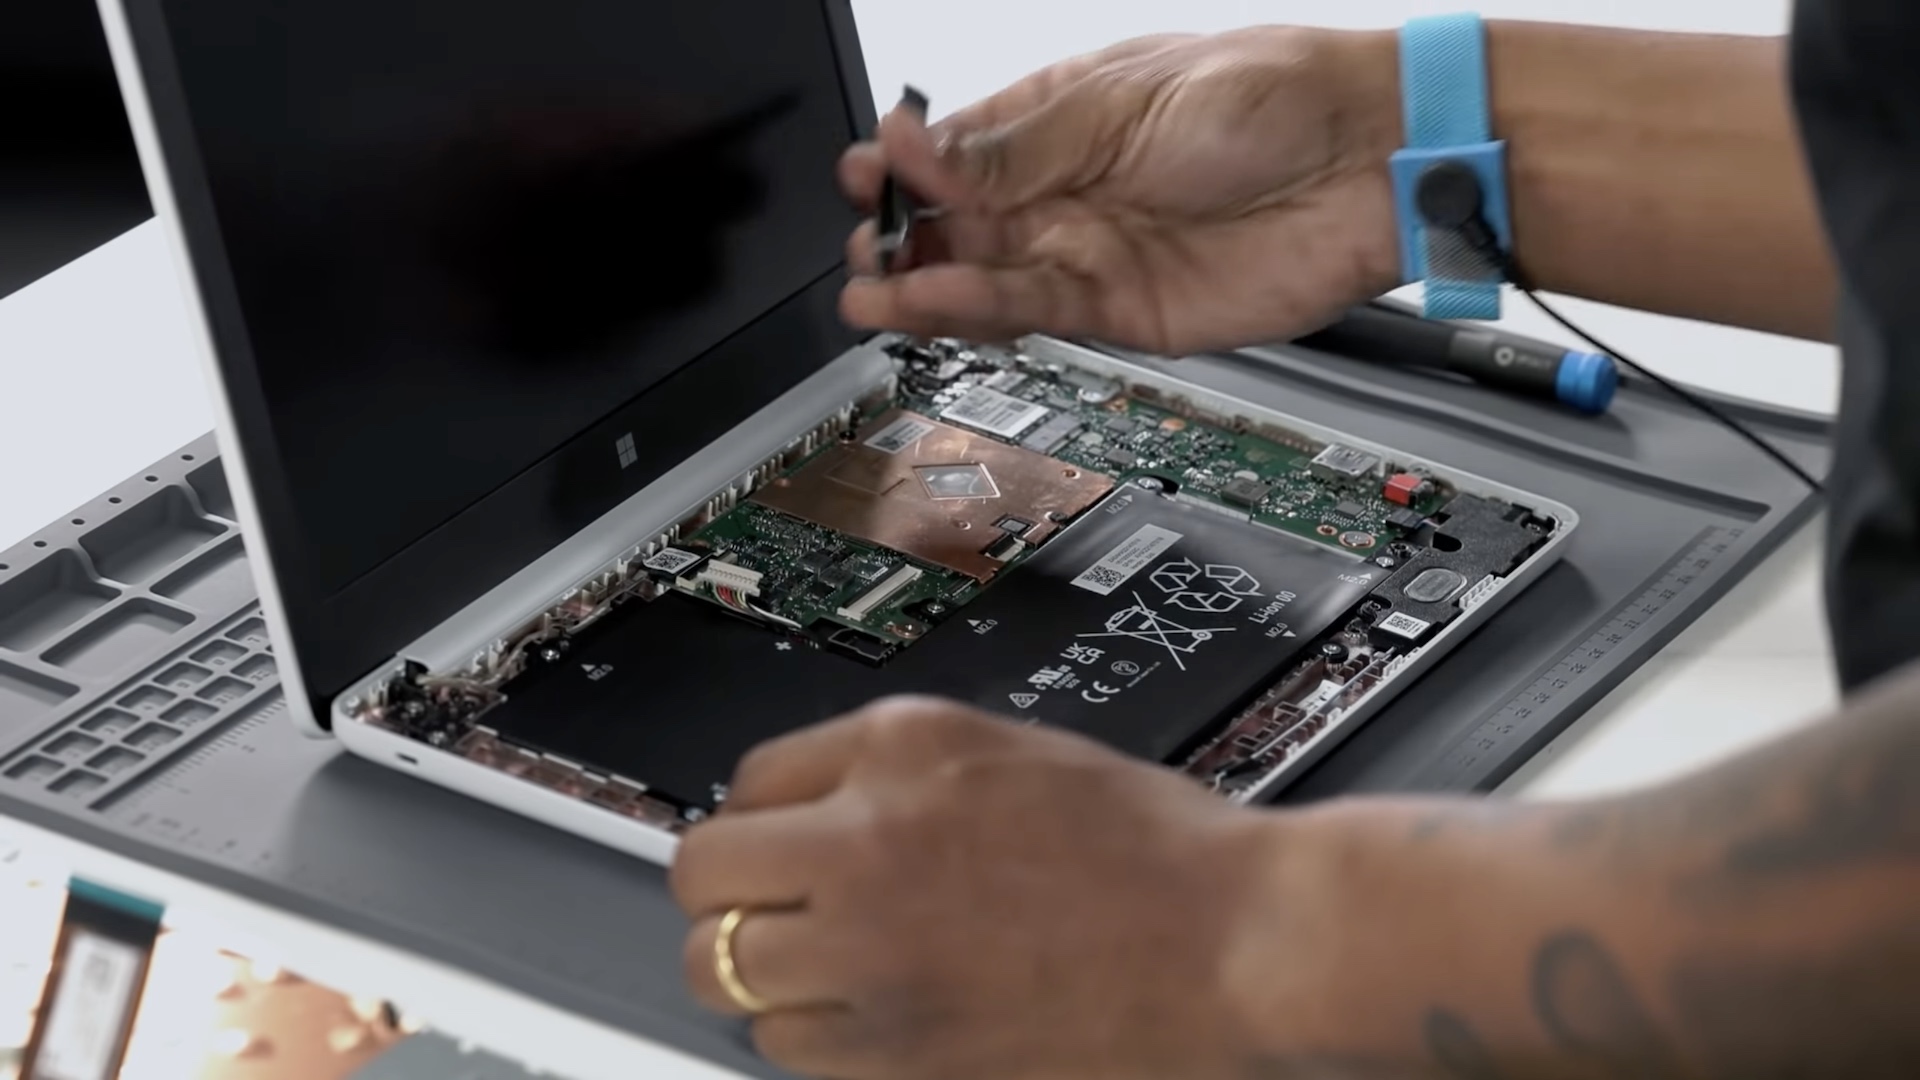 Microsoft has started selling spare parts for Surface devices so that users can carry out out-of-warranty repairs themselves